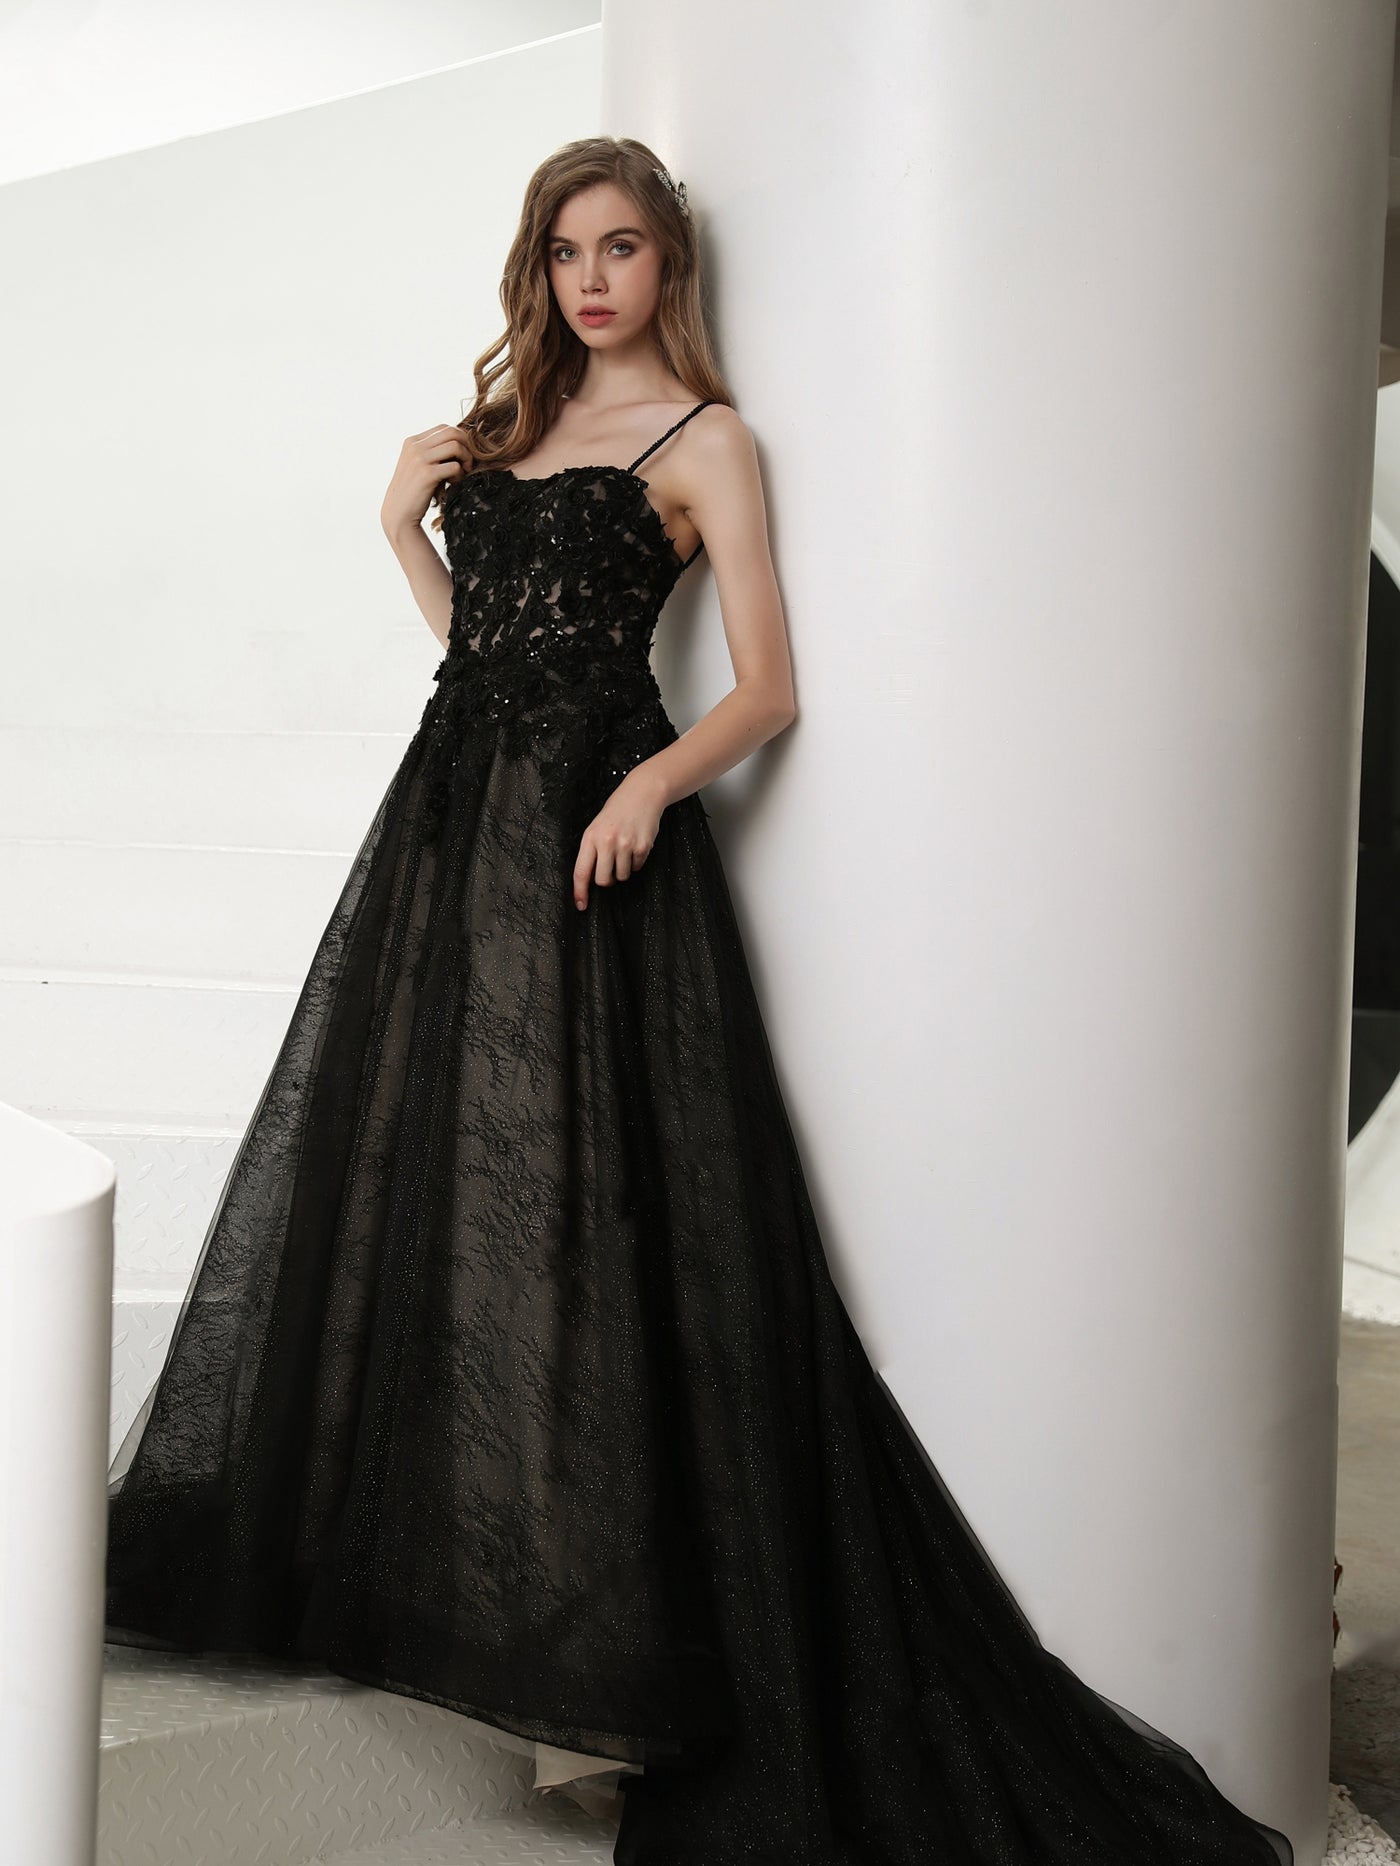 A person in a Bergamot Bridal Black Illusion Lace Wedding Dress with Detachable Long Sleeves posing against a wall.